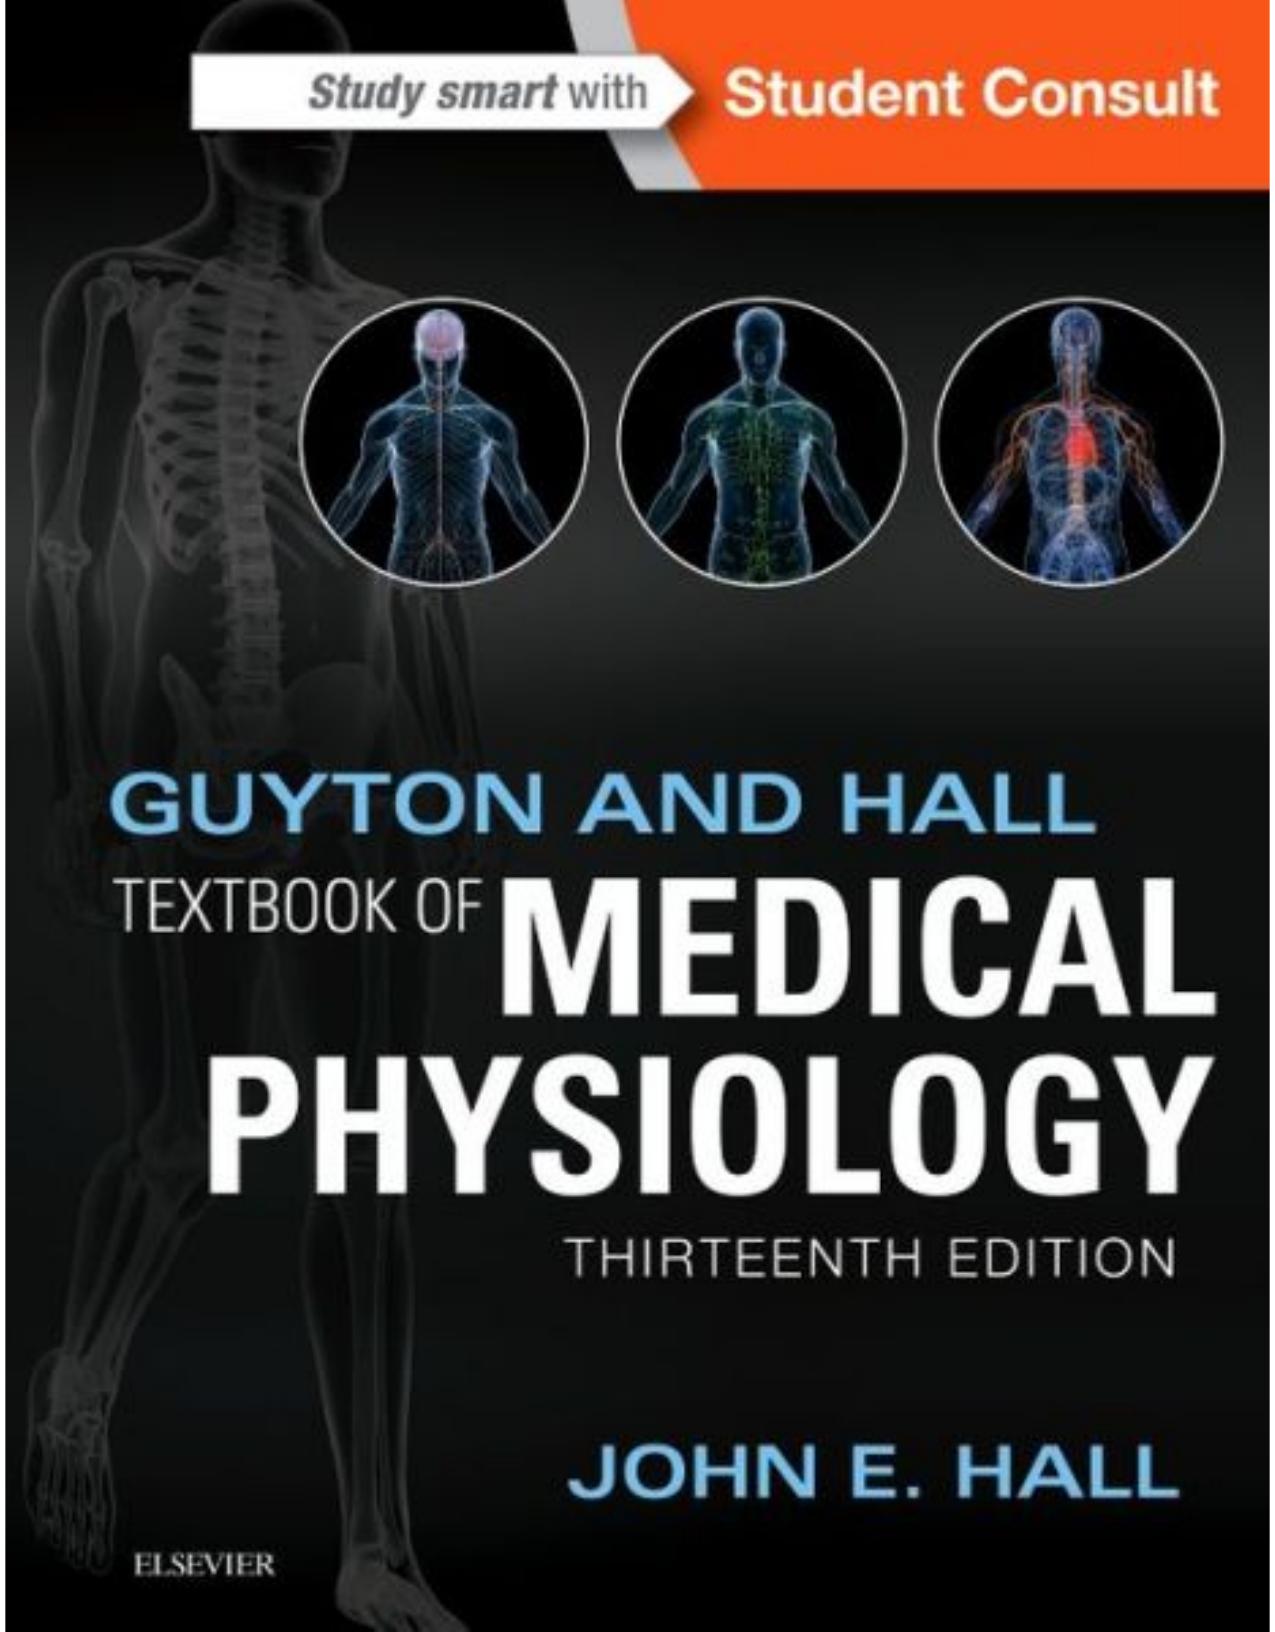 Textbook of Medical Physiology, Guyton and Hall, 13th Ed